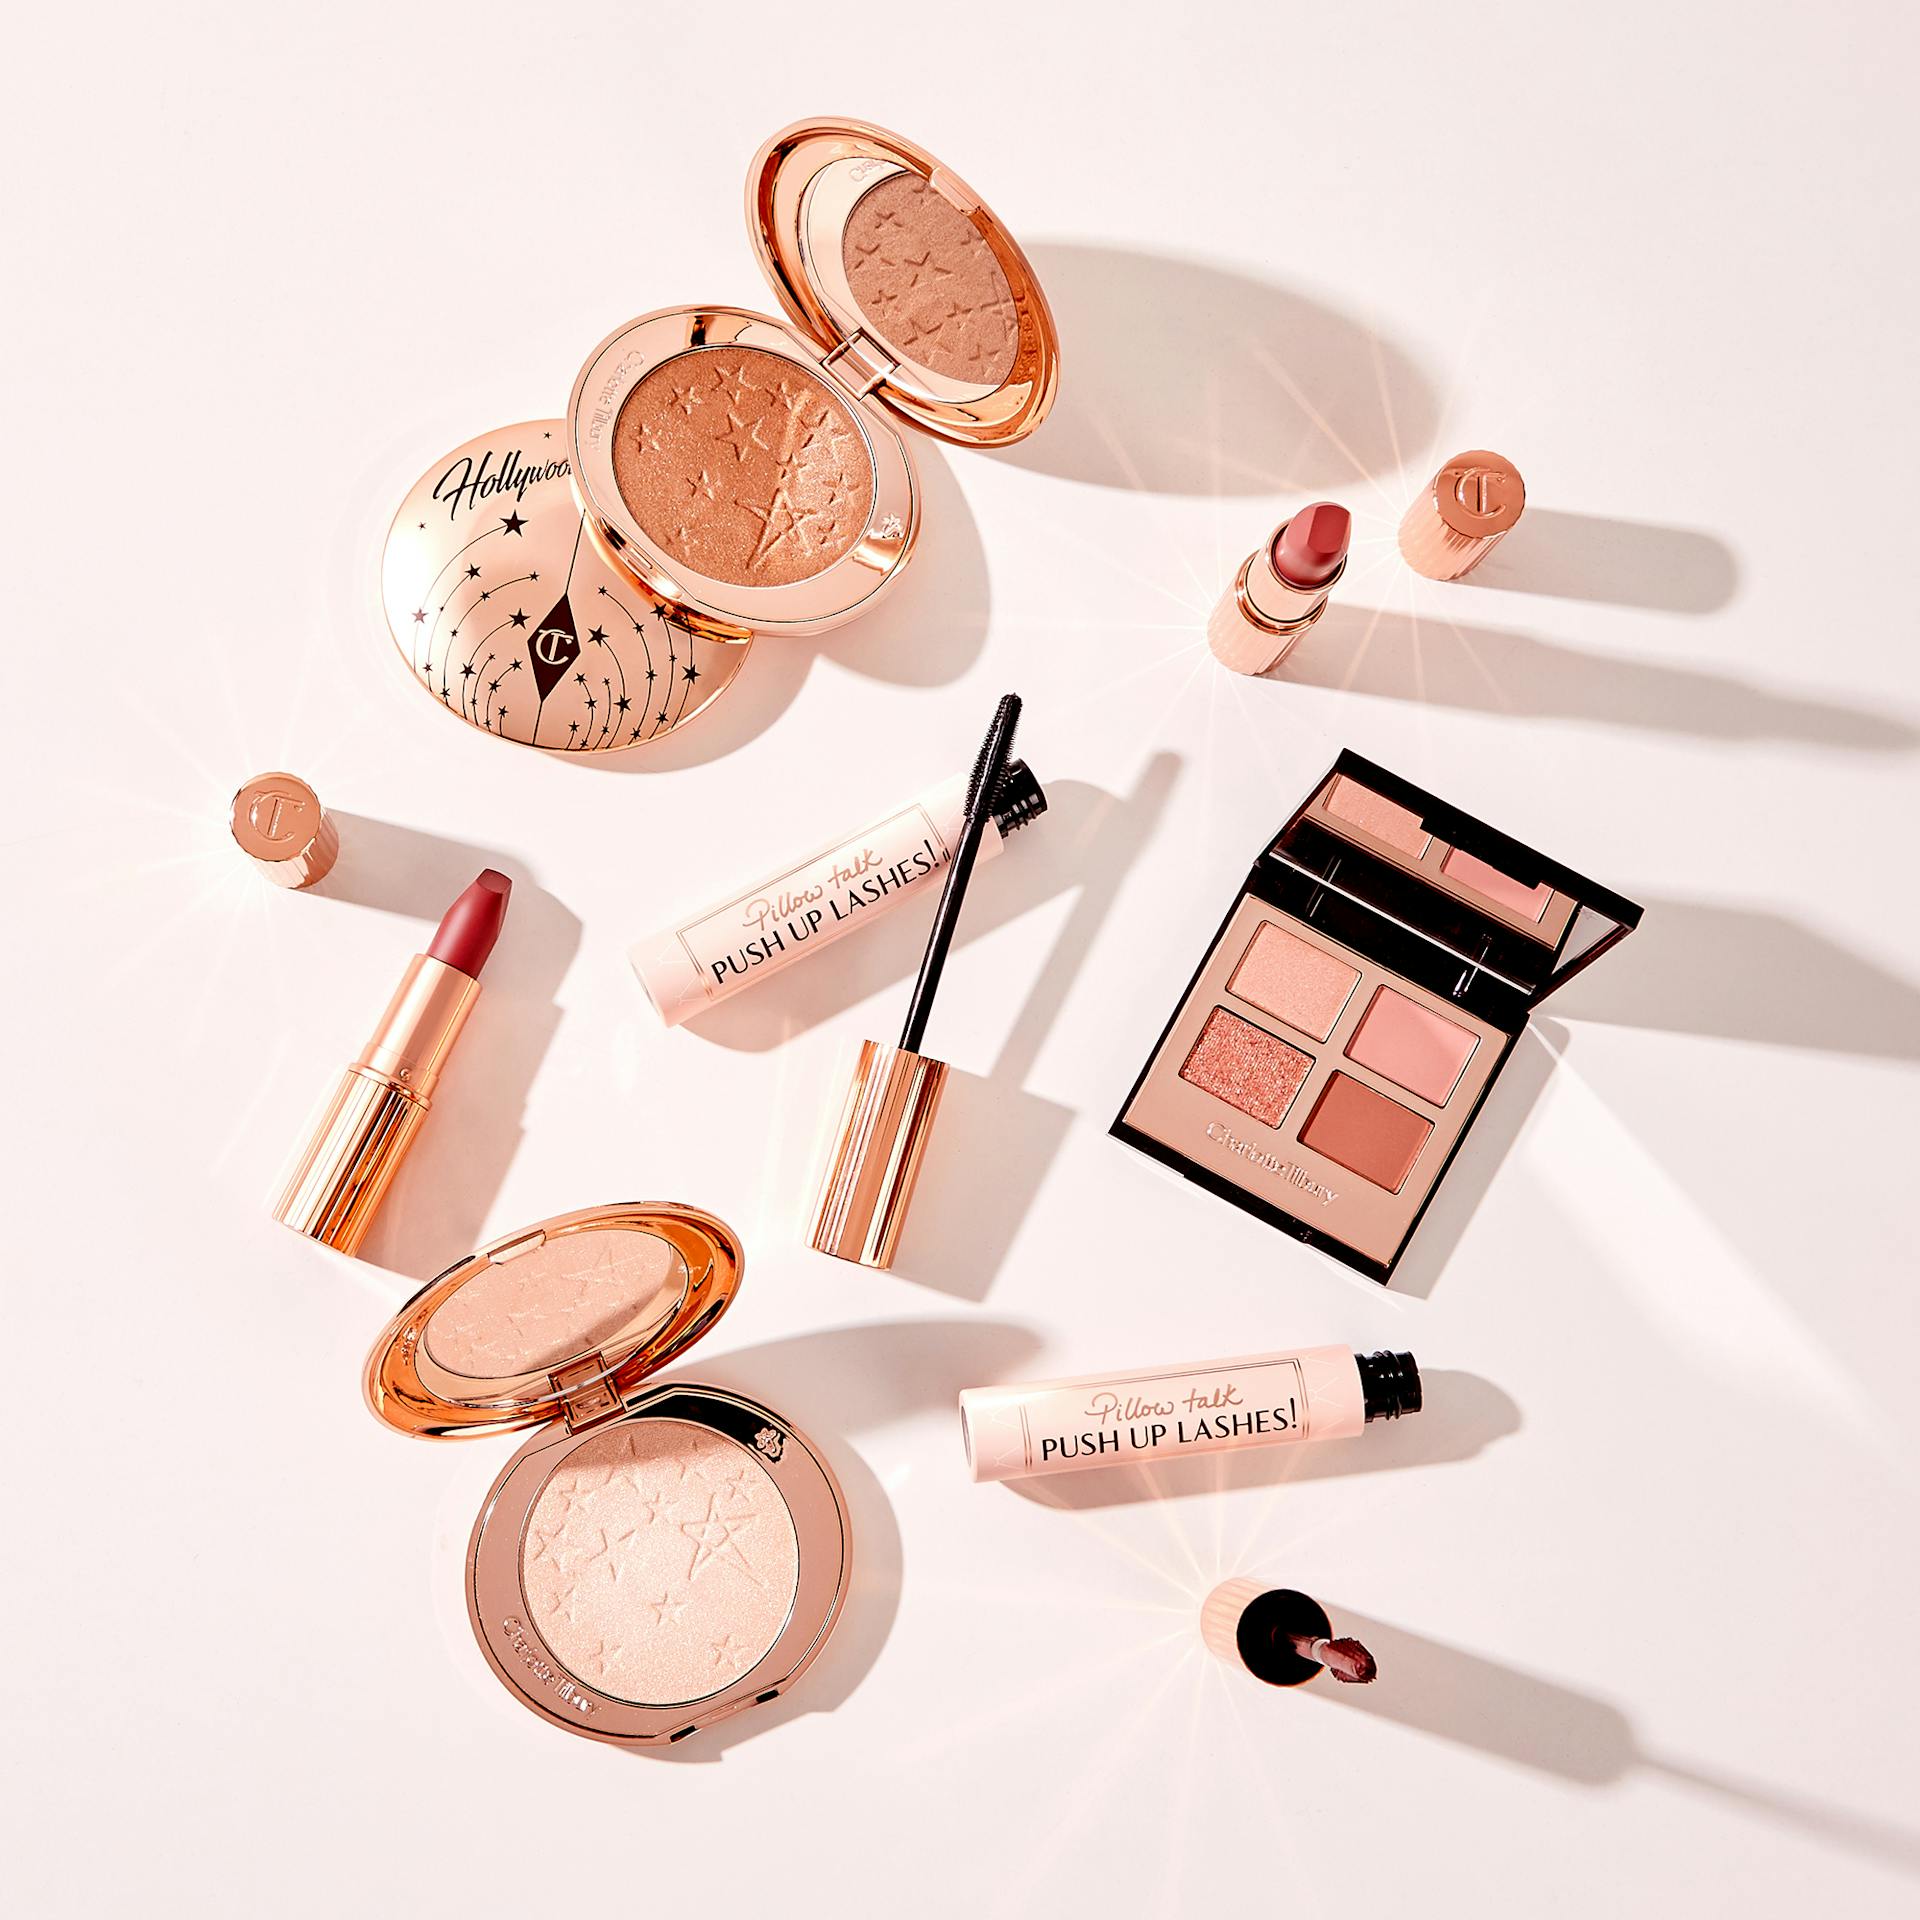 ONE TO ONE WITH CHARLOTTE TILBURY